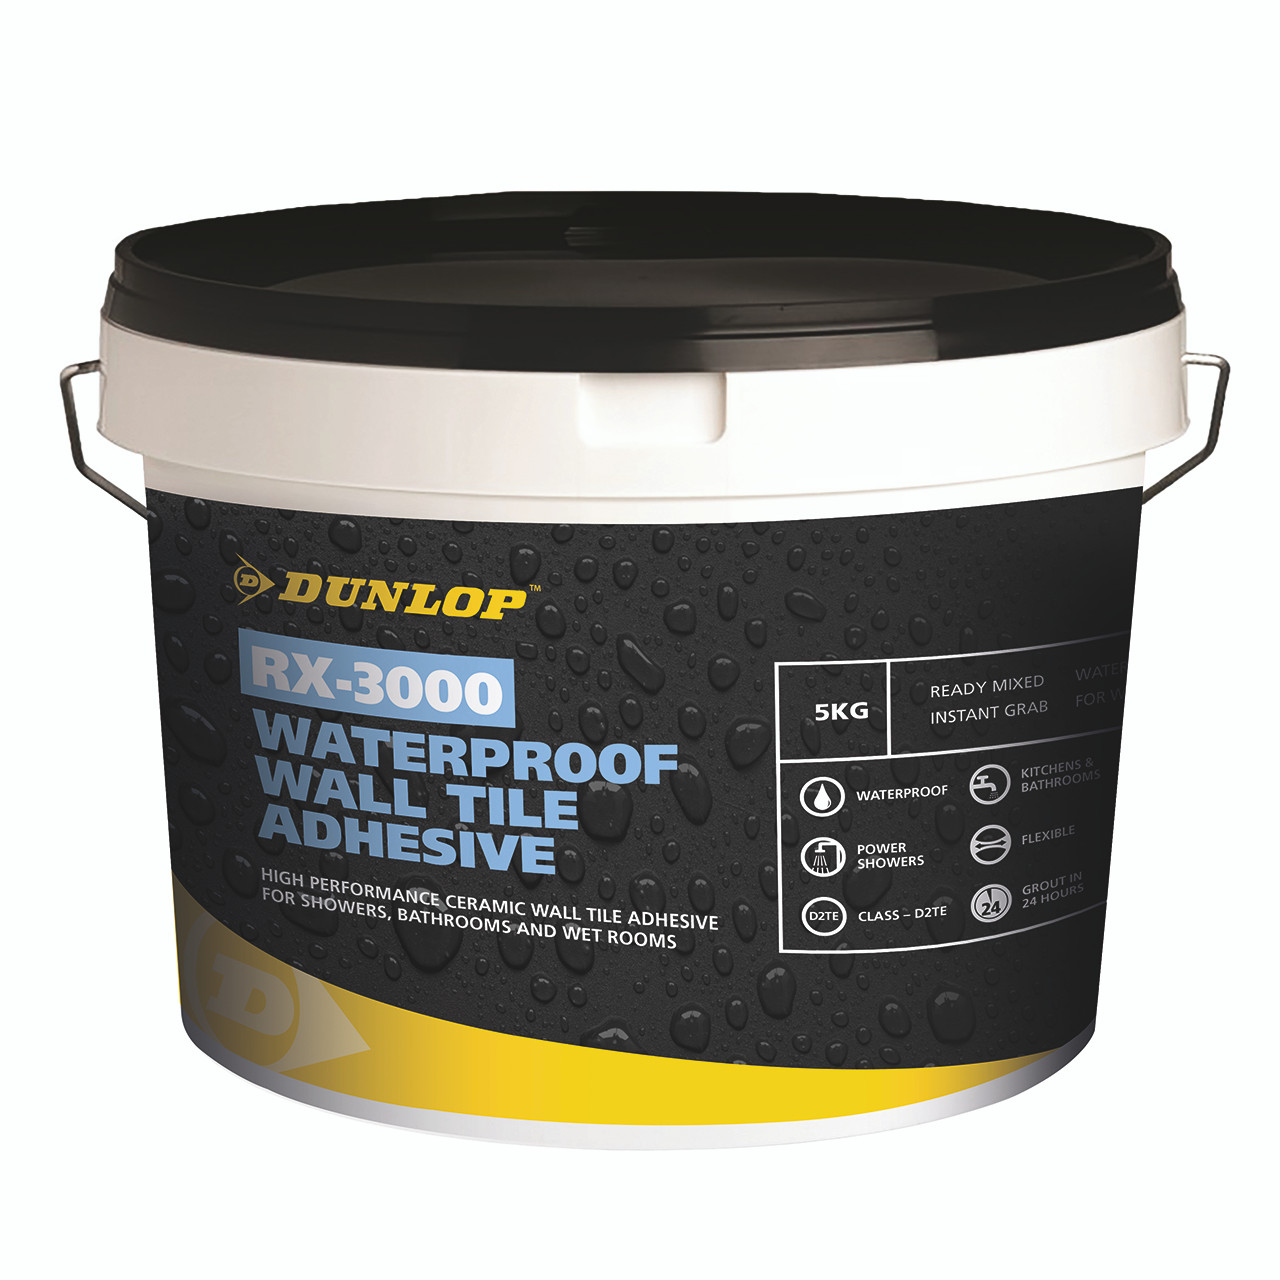 Photograph of Dunlop RX-3000 Waterproof Wall Tile Adhesive 5kg